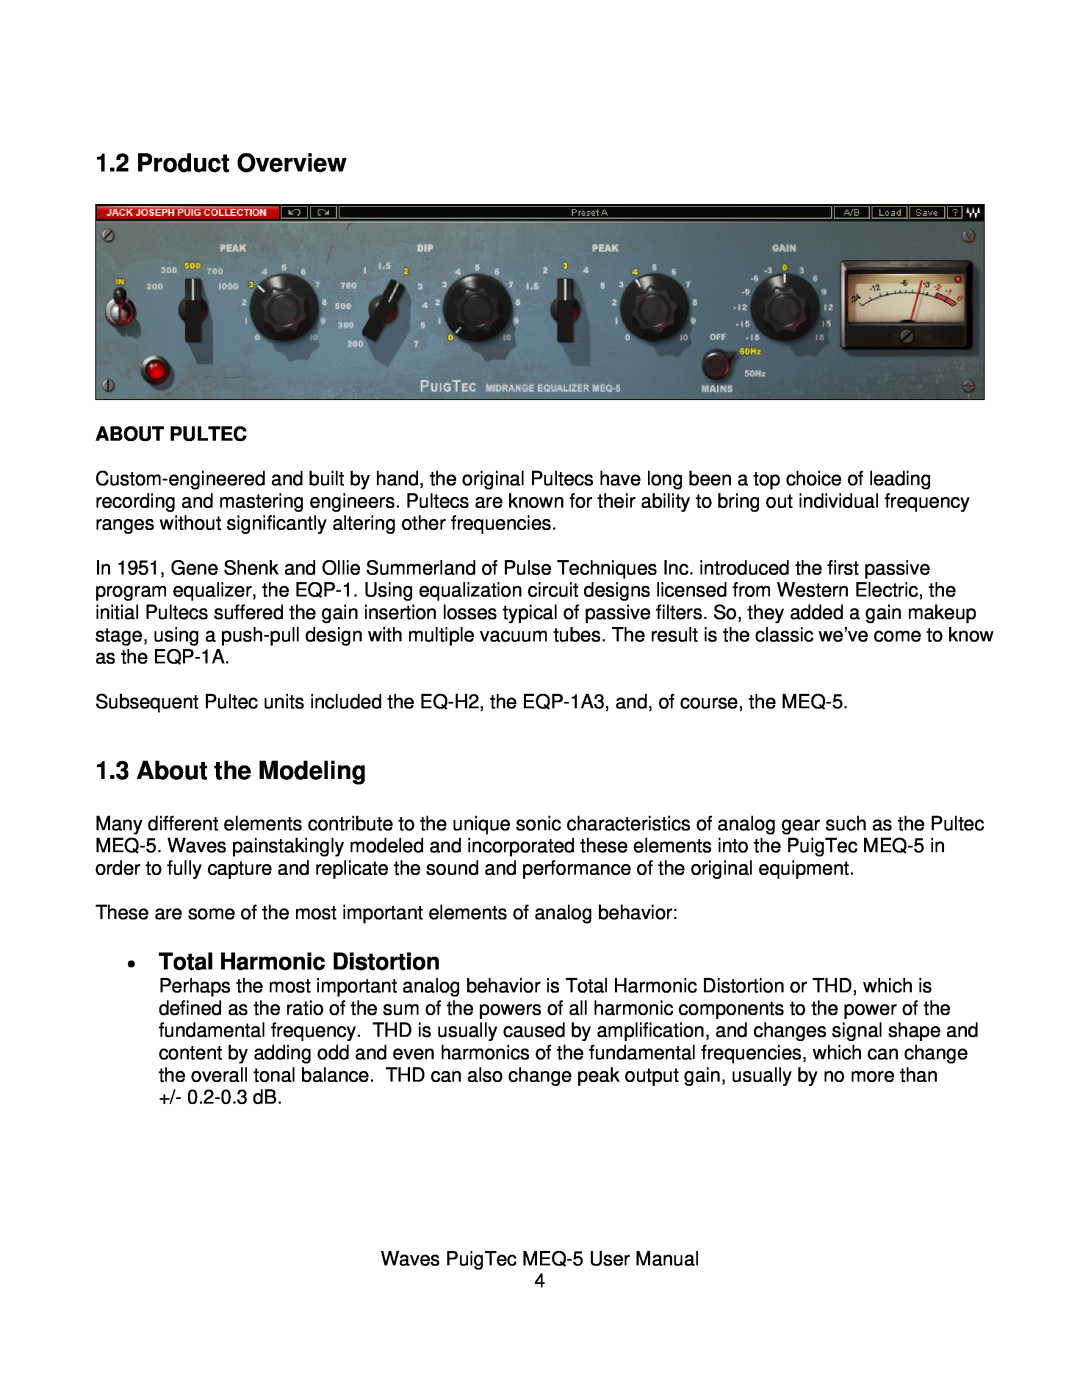 Waves MEQ-5 user manual Product Overview, About the Modeling, Total Harmonic Distortion 